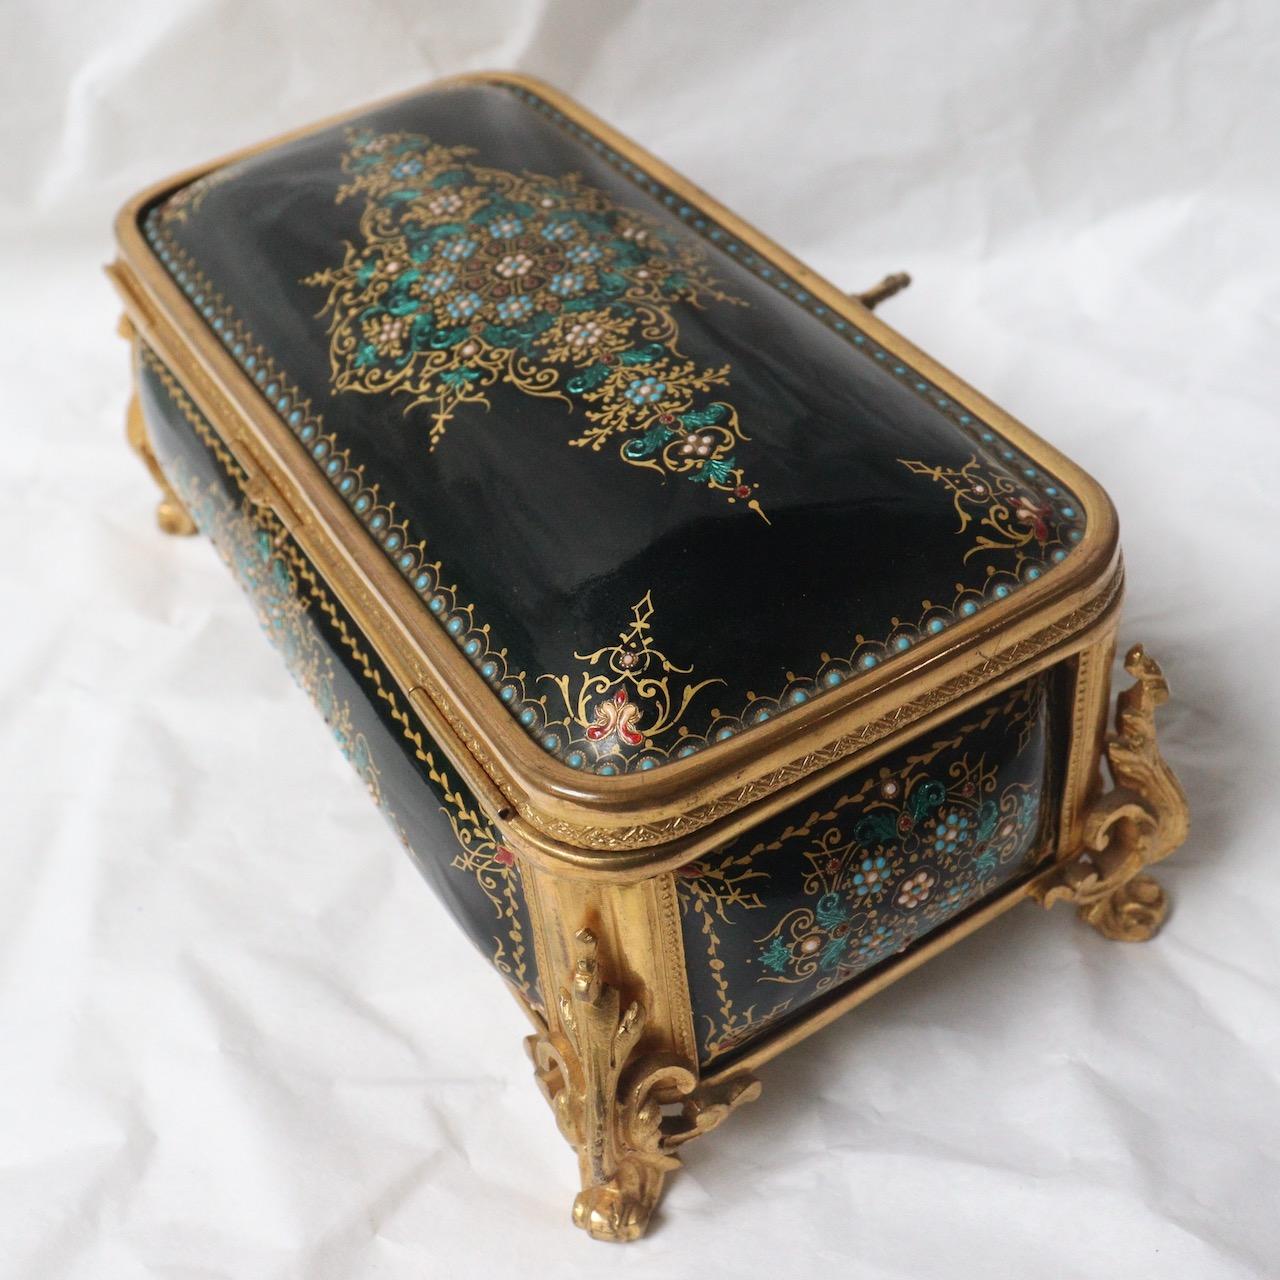 19th Century French Enamel and Ormolu-Mounted Jewelry Casket 1